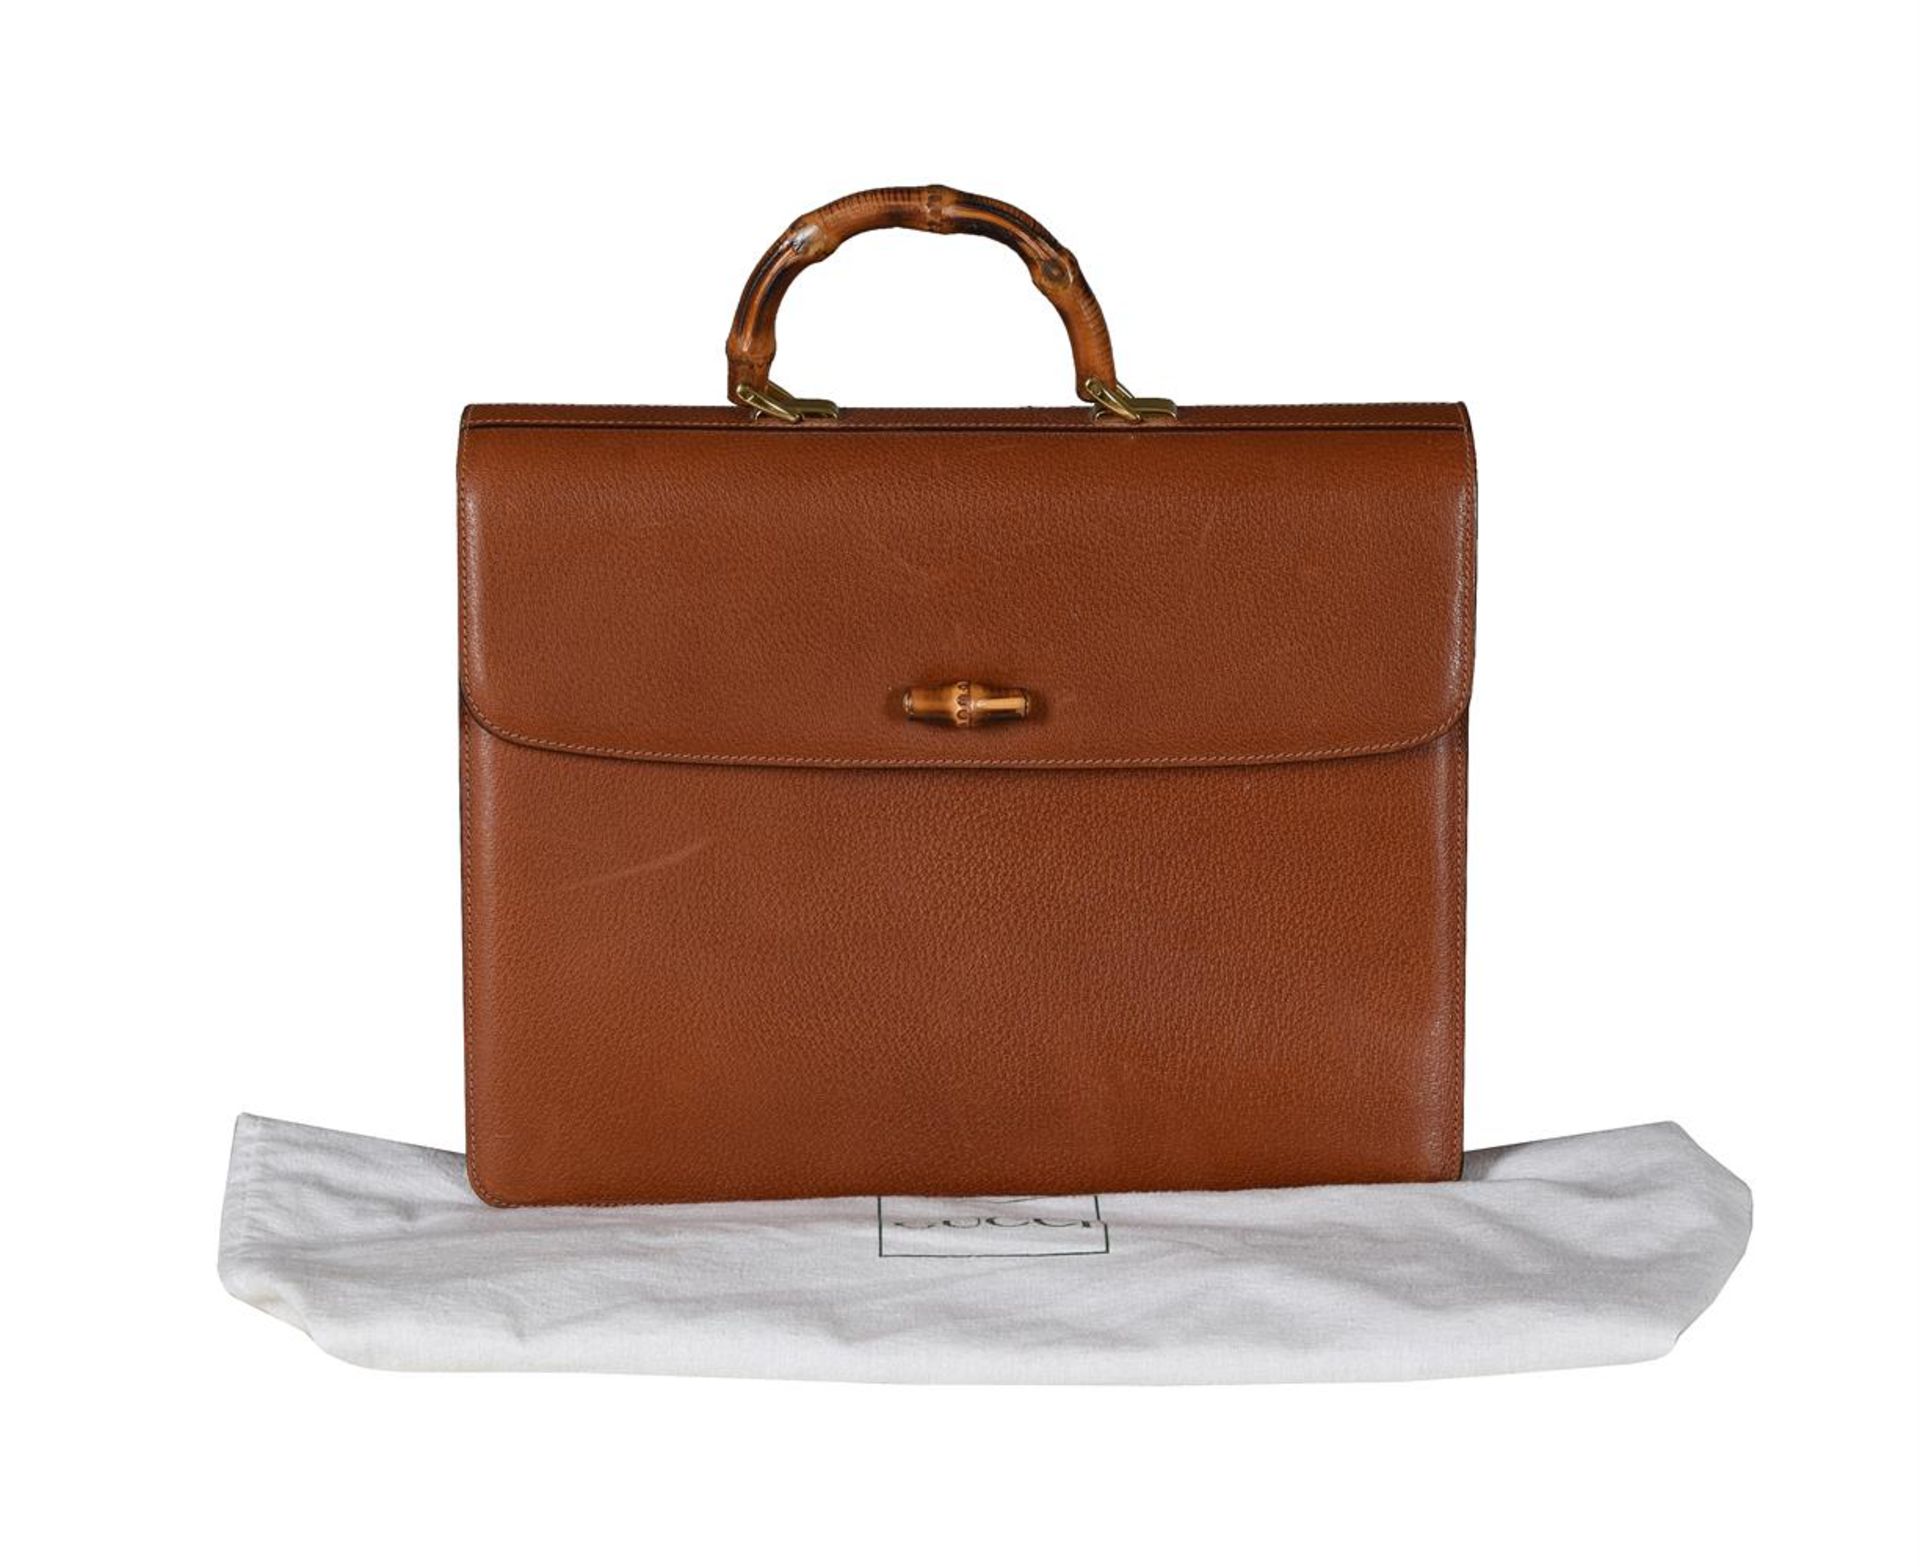 GUCCI, A VINTAGE TAN LEATHER AND BAMBOO BRIEFCASE - Image 3 of 5